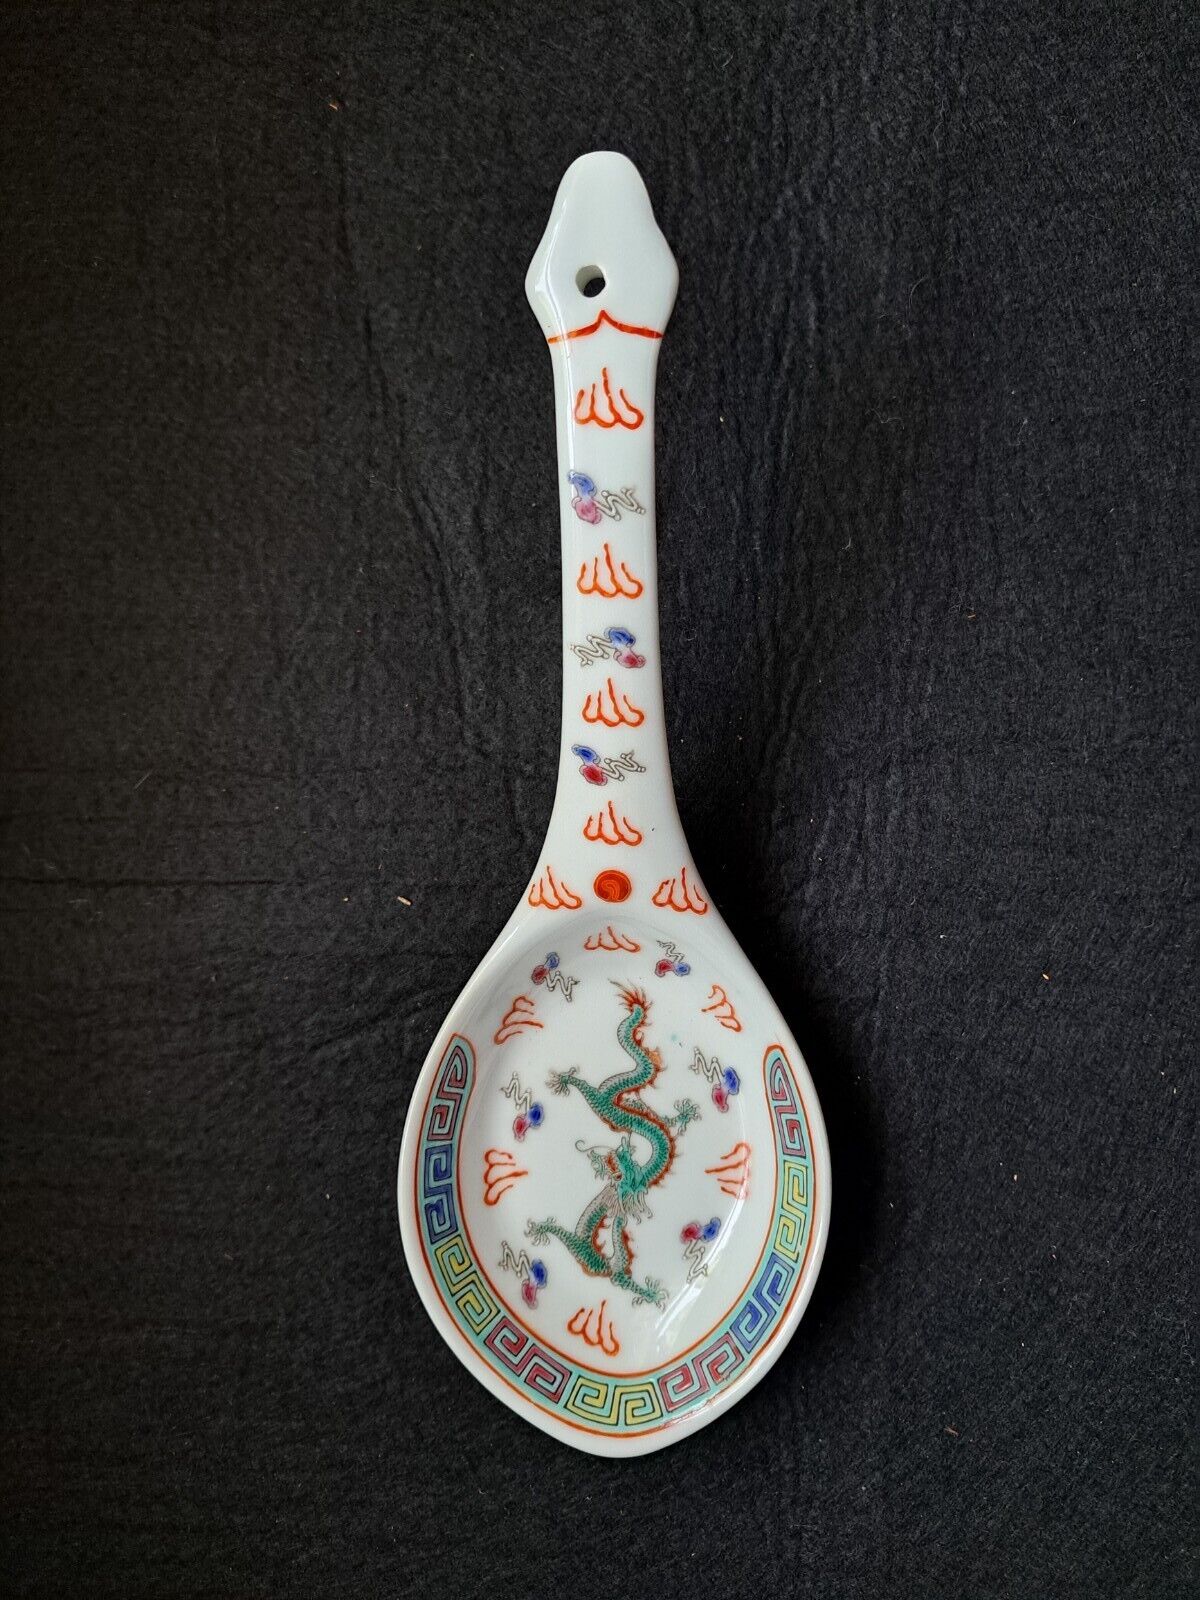 Authentic Chinese Porcelain Spoon Rest